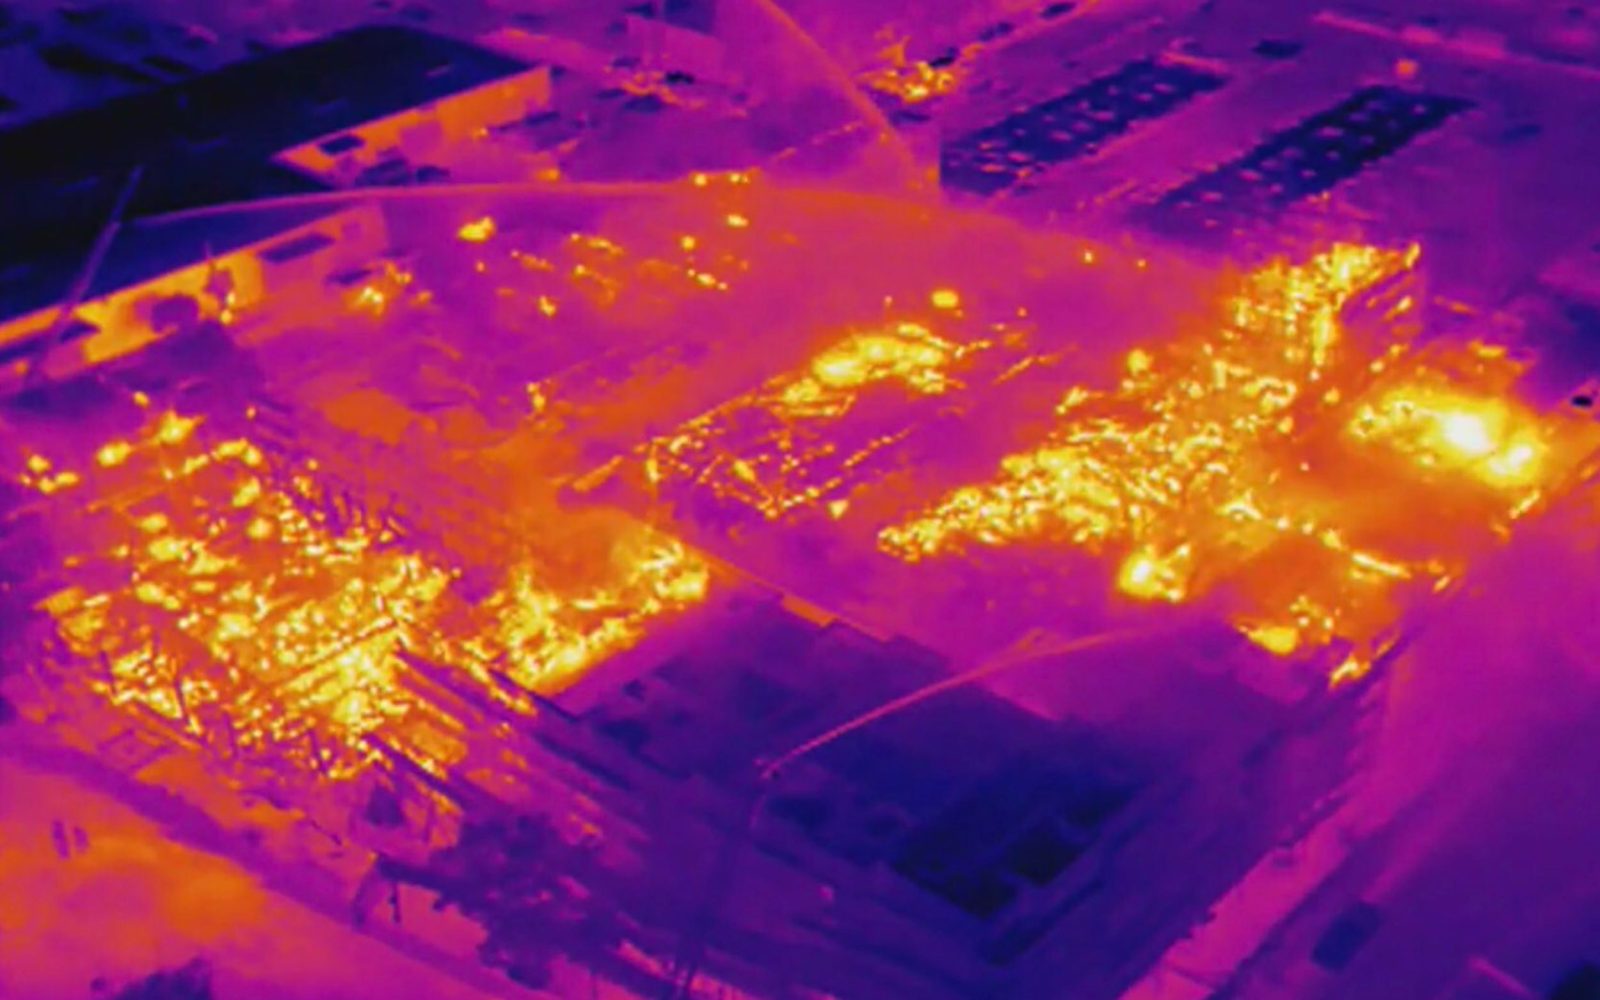 Drone with thermal camera shows hot spots in massive fire in Oakland, Calif.